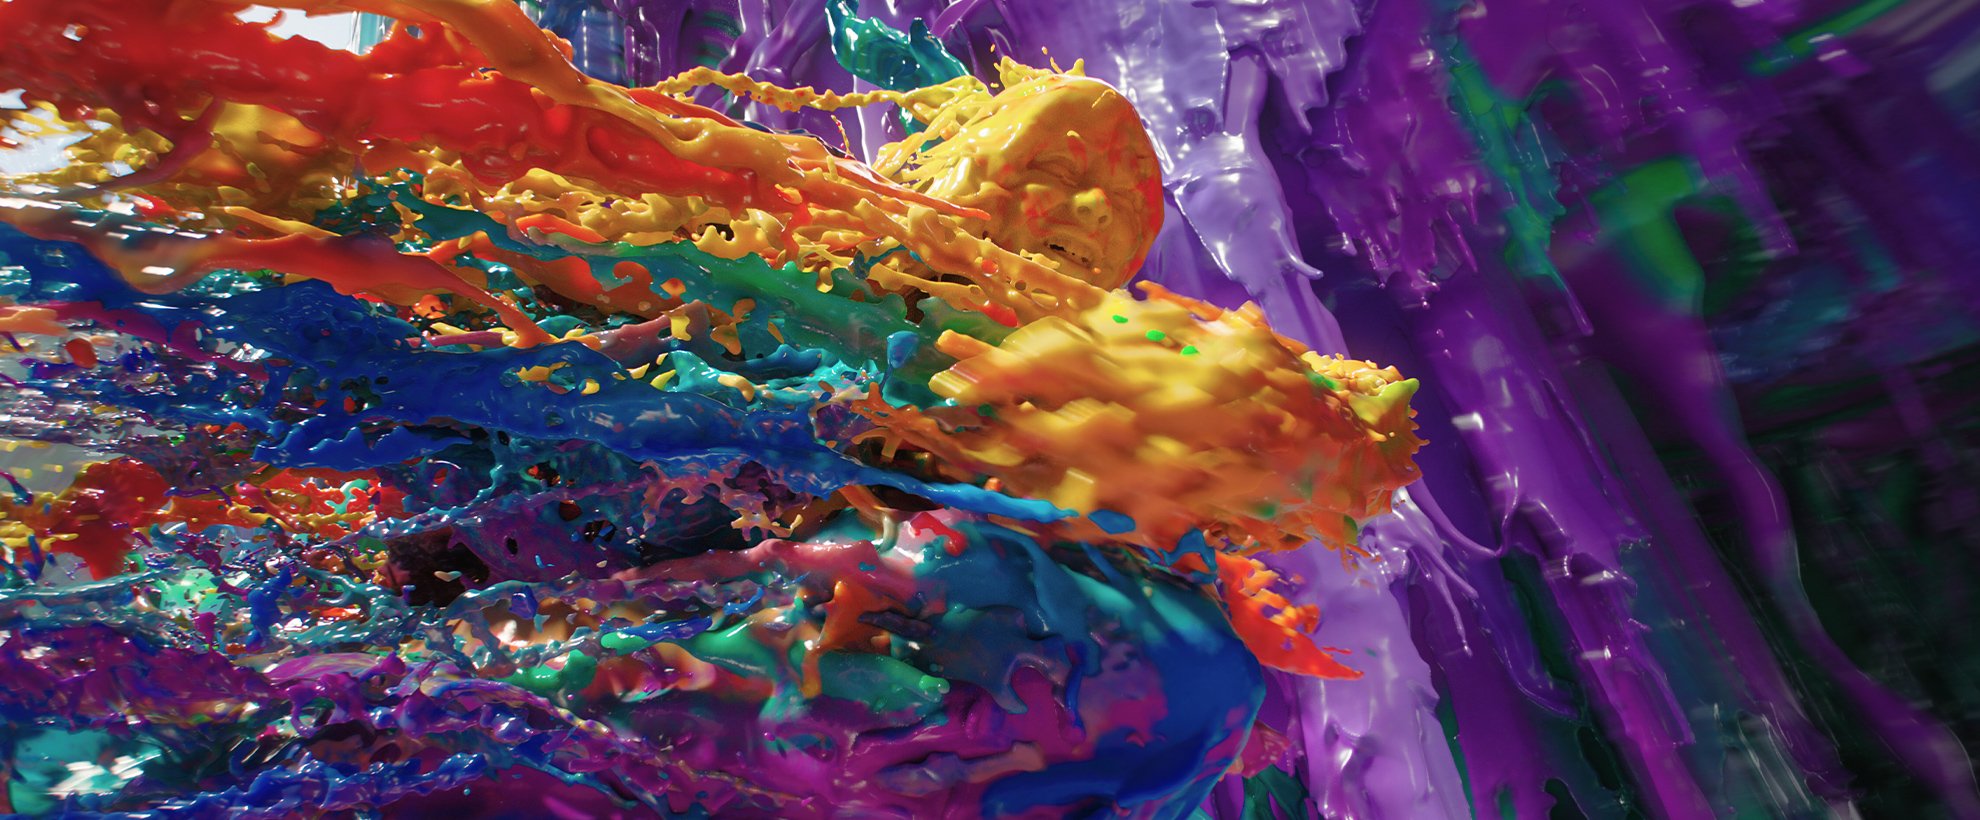 A person disintegrates into colorful paint